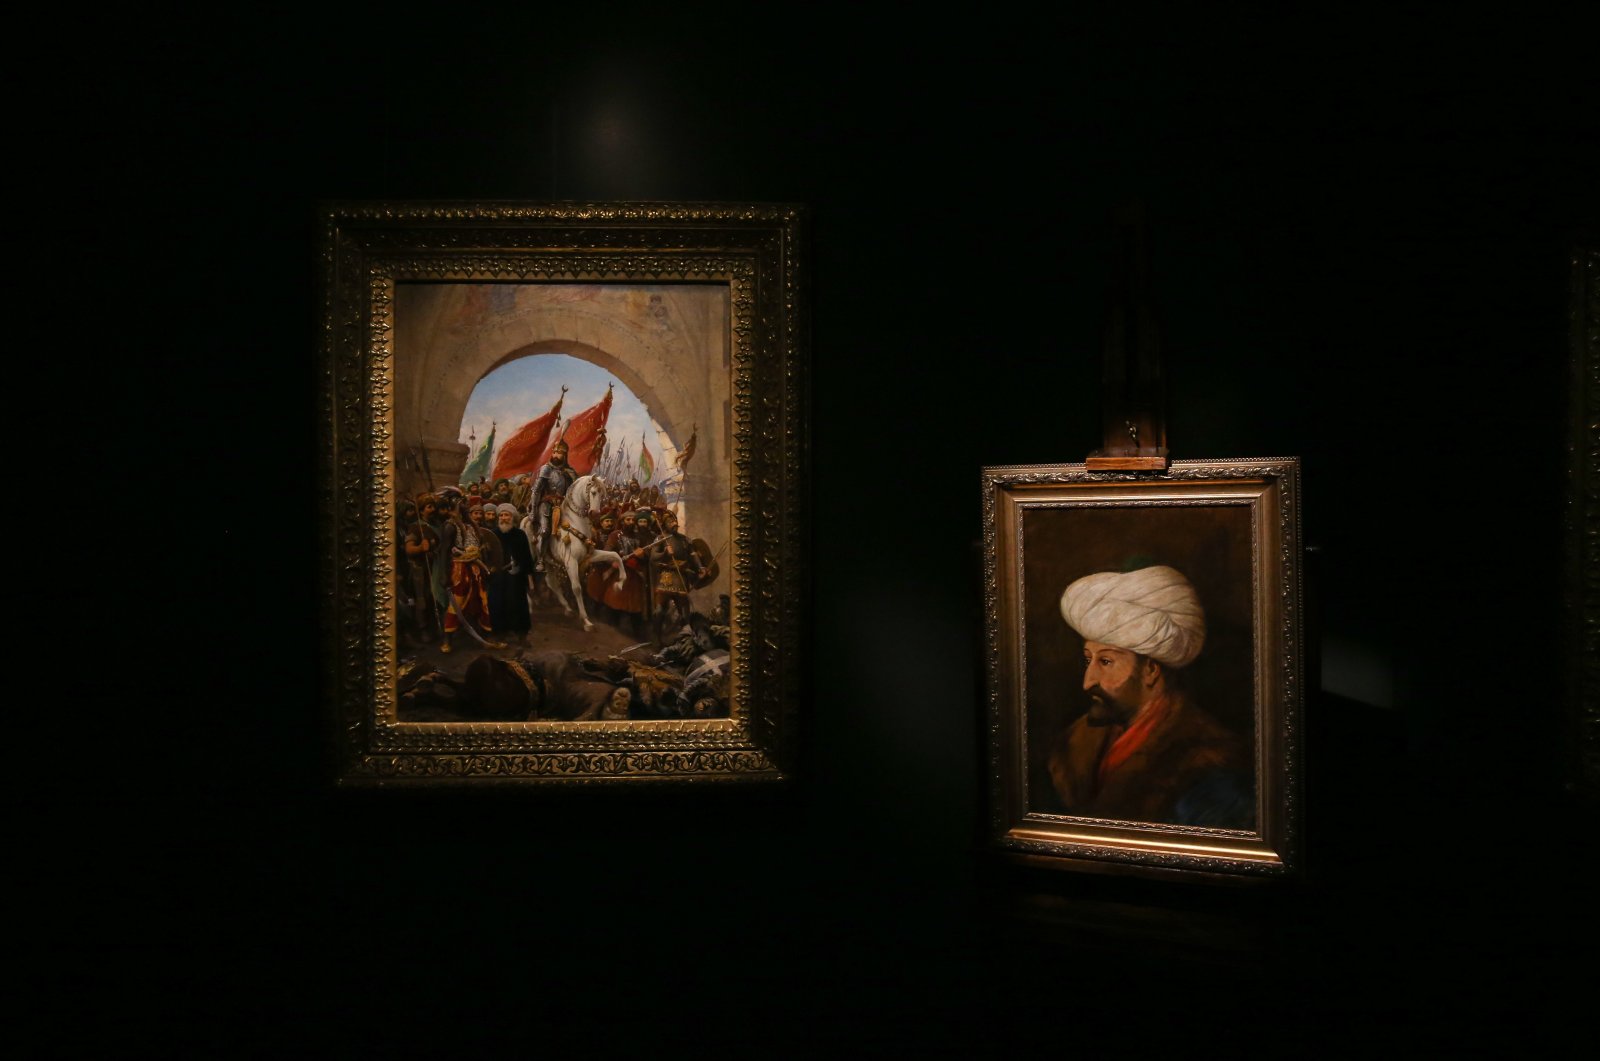 Fausto Zonaro's painting (L) depicting Sultan Mehmed II's entry into Istanbul and Halil Pasha's portrait of the sultan.